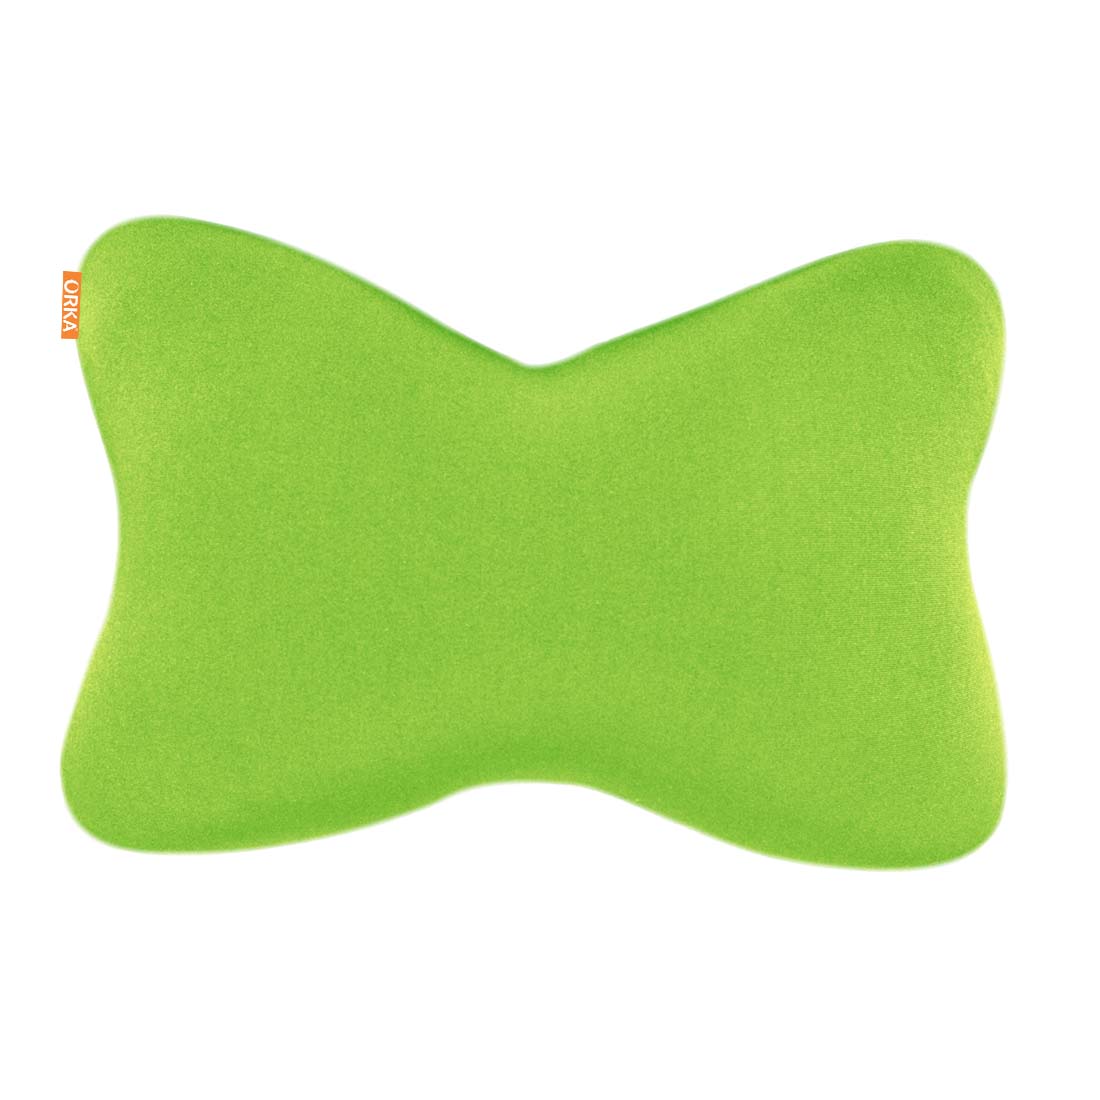 ORKA Classic Car Neckrest Pillow Filled With Microbeads [Pack Of 2] - Green  